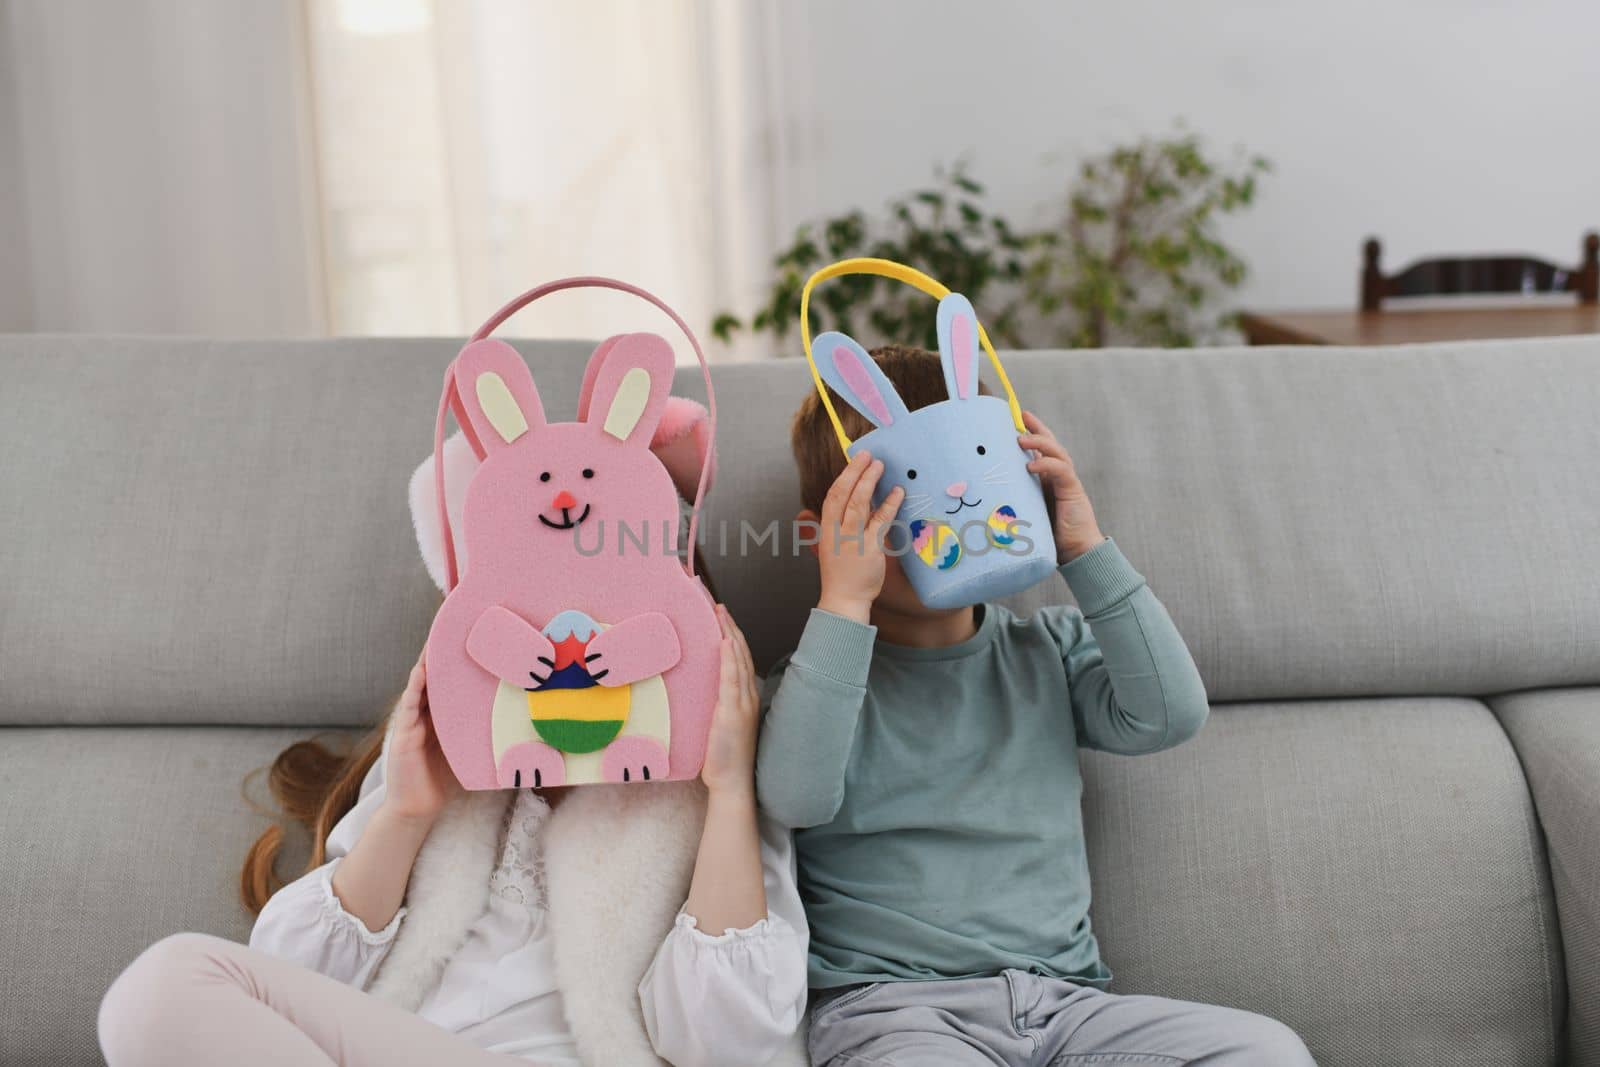 The kids with bunny ears and basket for chocolate eggs